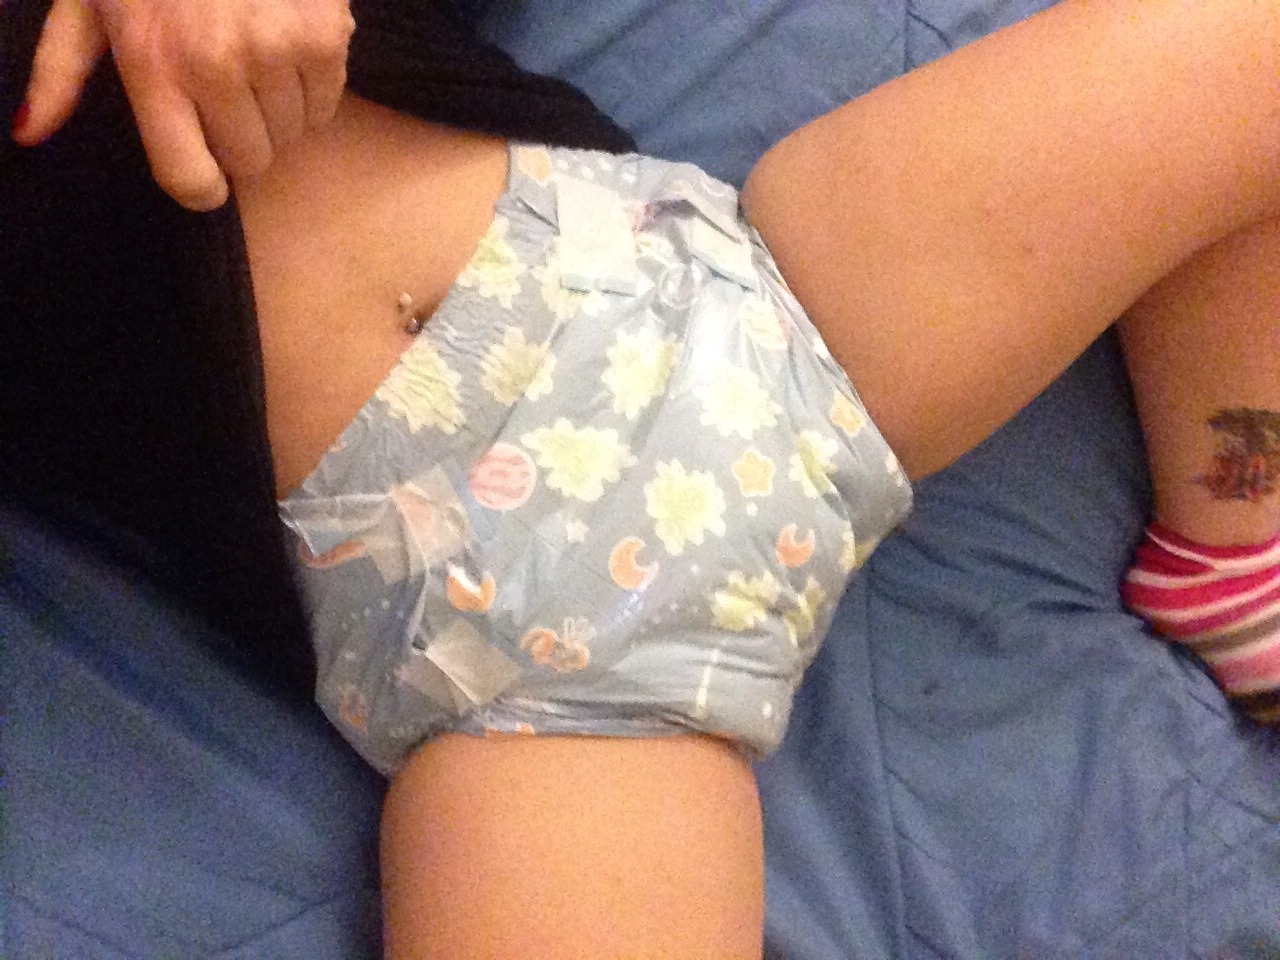 Finally got a bag of the ABU Space diapers from my lovely foot slave. He loves spoiling